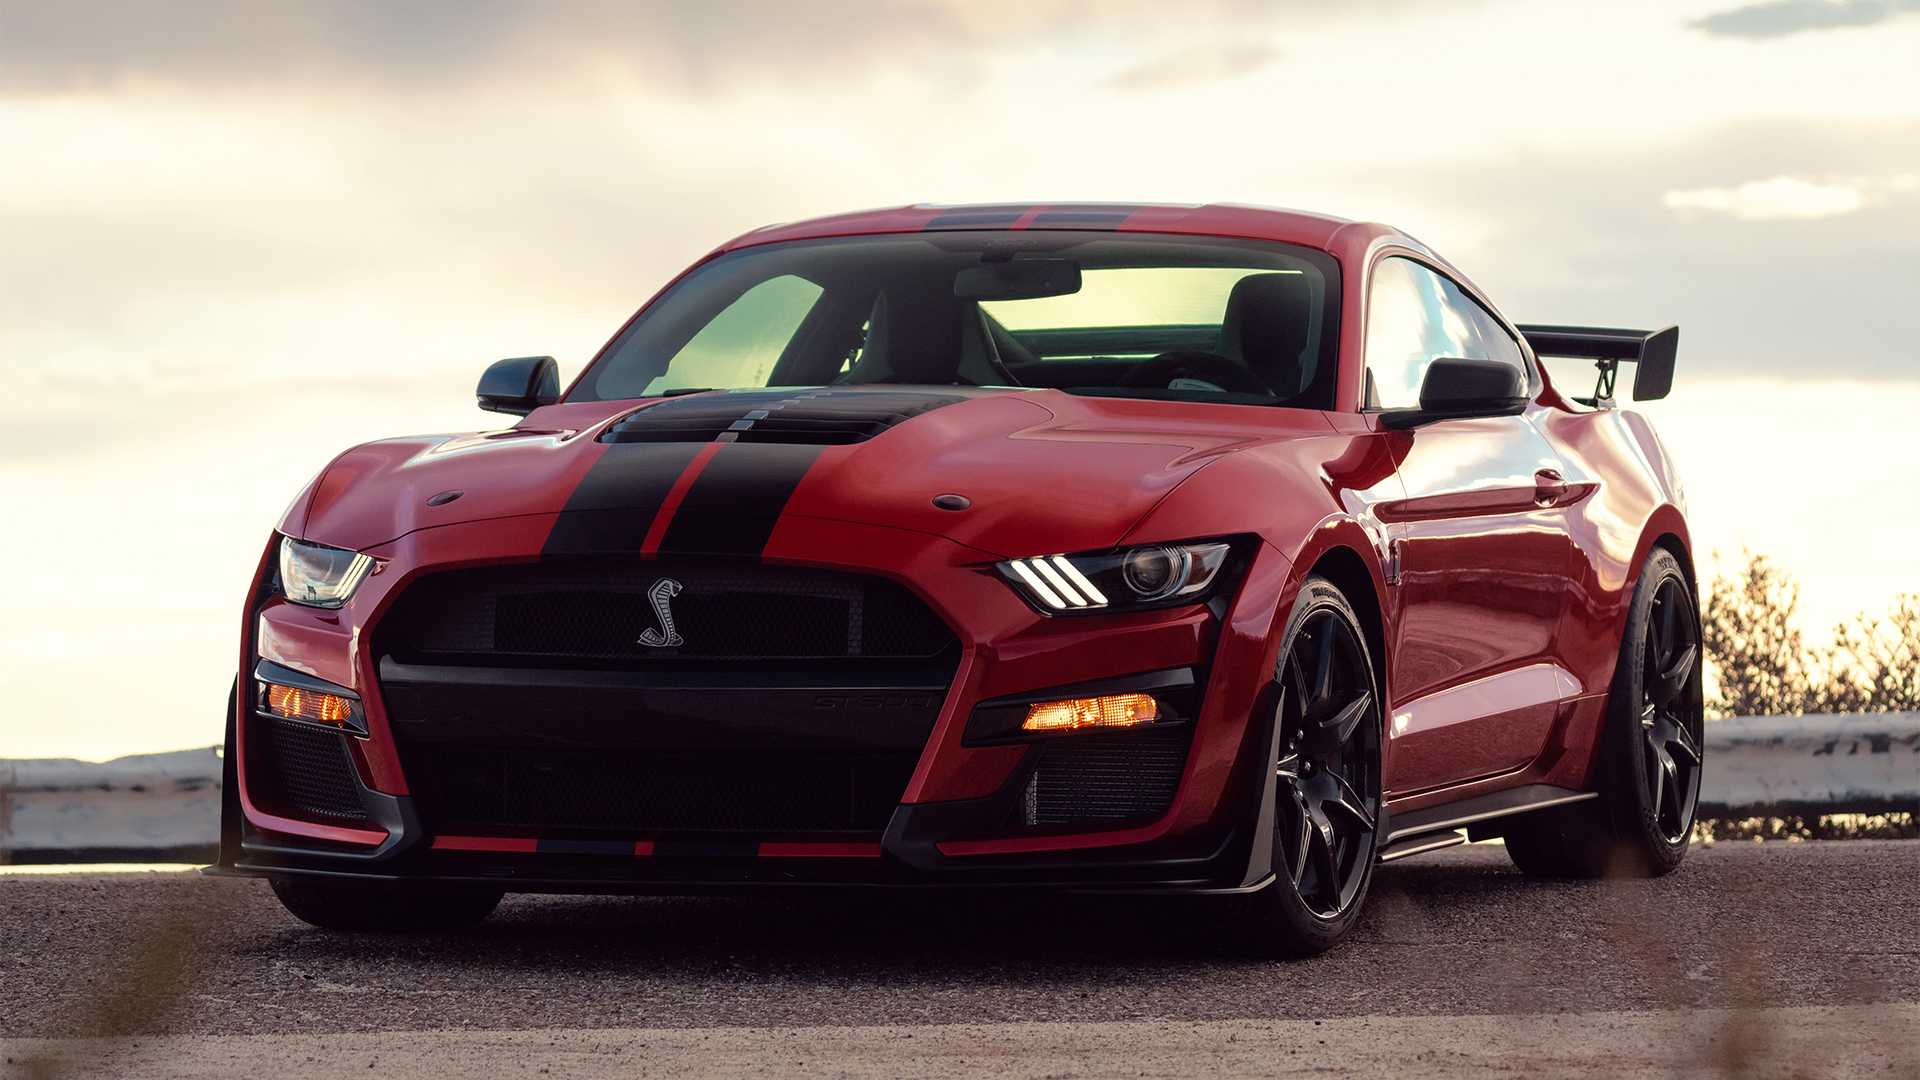 Some Ford Dealerships Want $000 For A New Shelby GT500